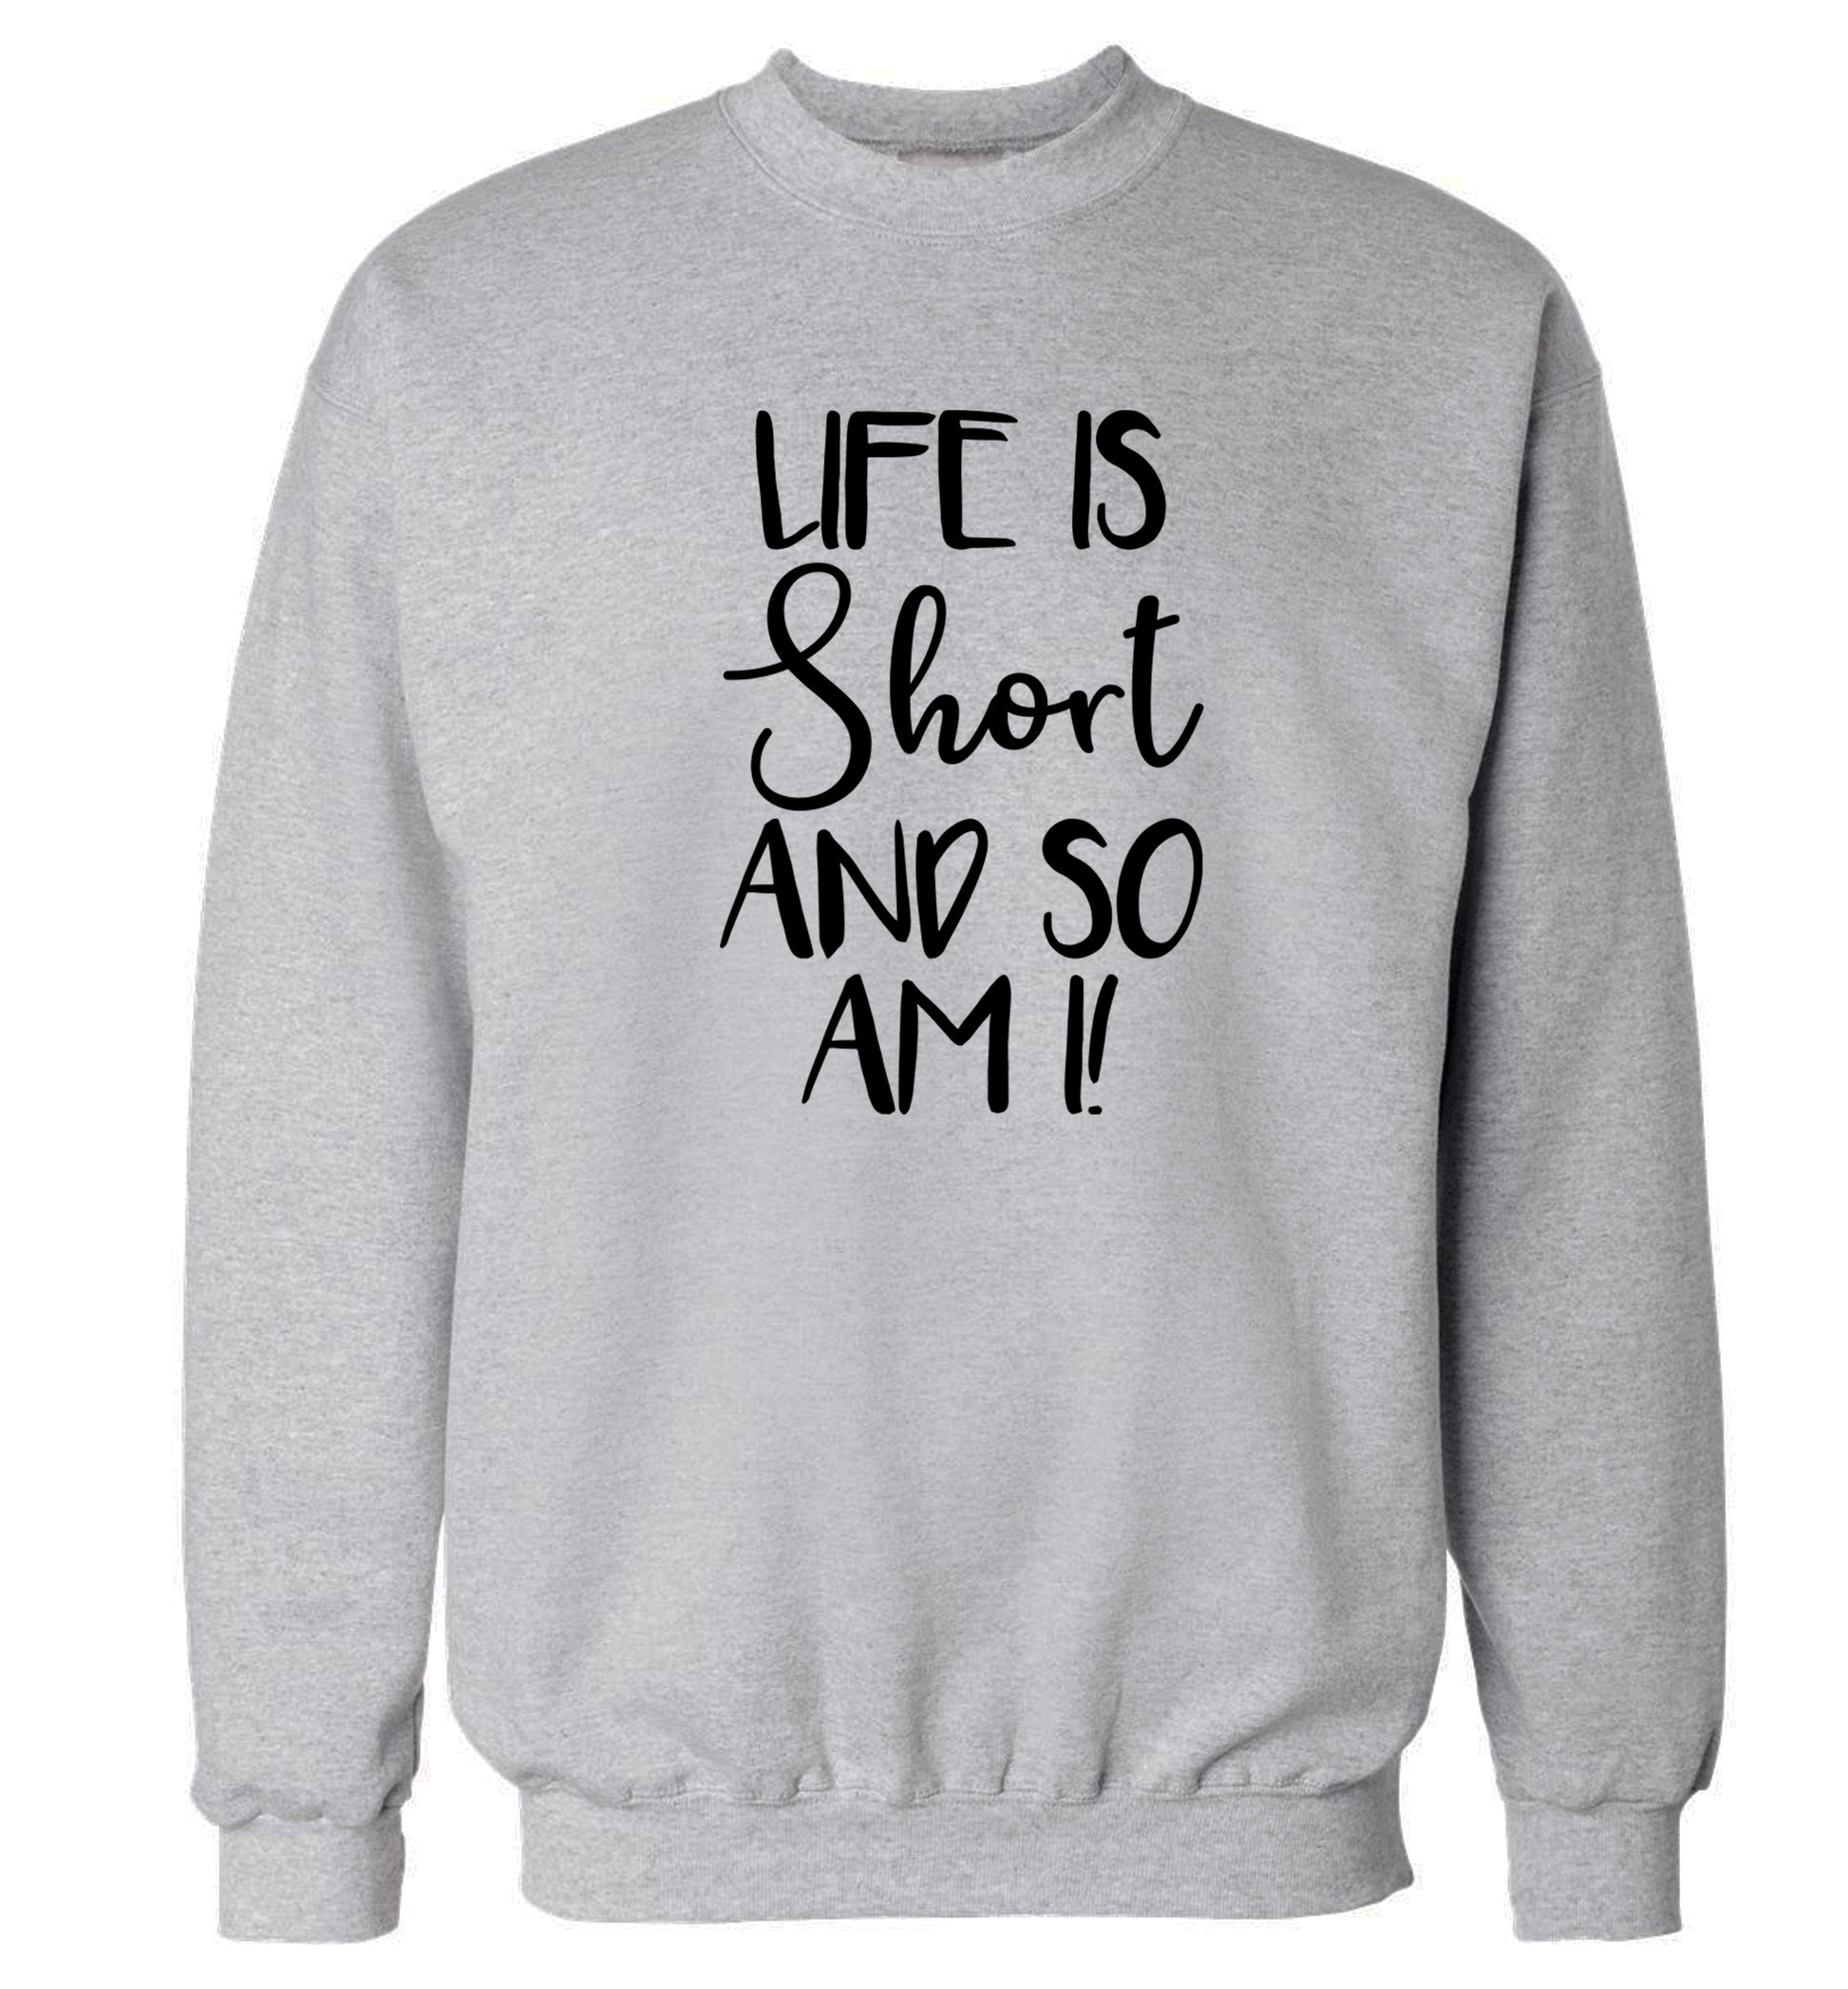 Life is short and so am I! Adult's unisex grey Sweater 2XL